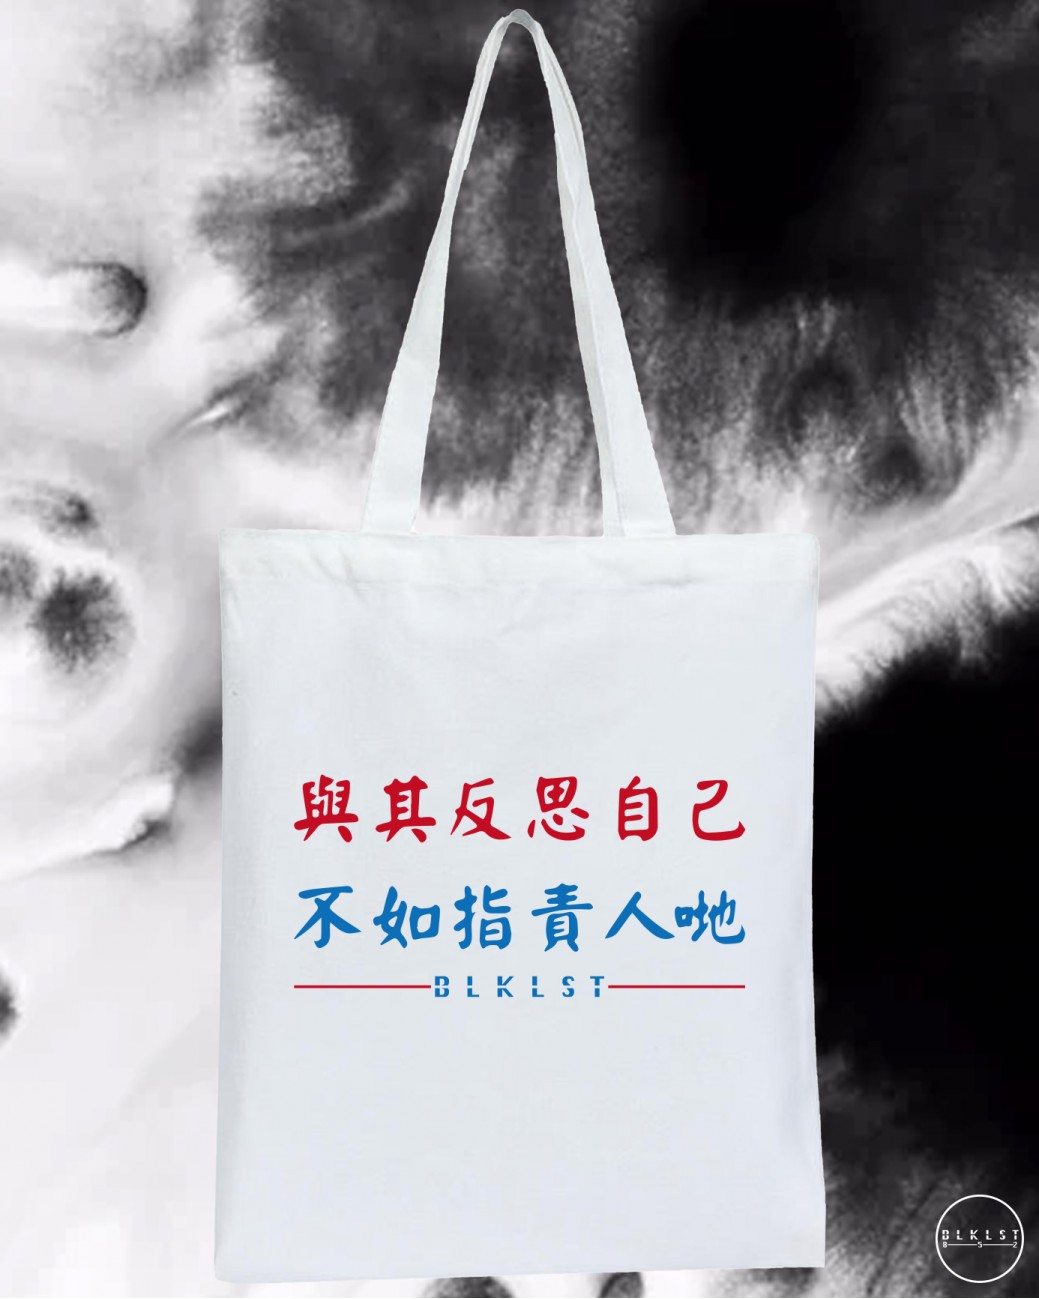 "INSTEAD OF REFLECTING ON YOURSELF , IT IS BETTER TO BLAME OTHERS." TOTE BAG